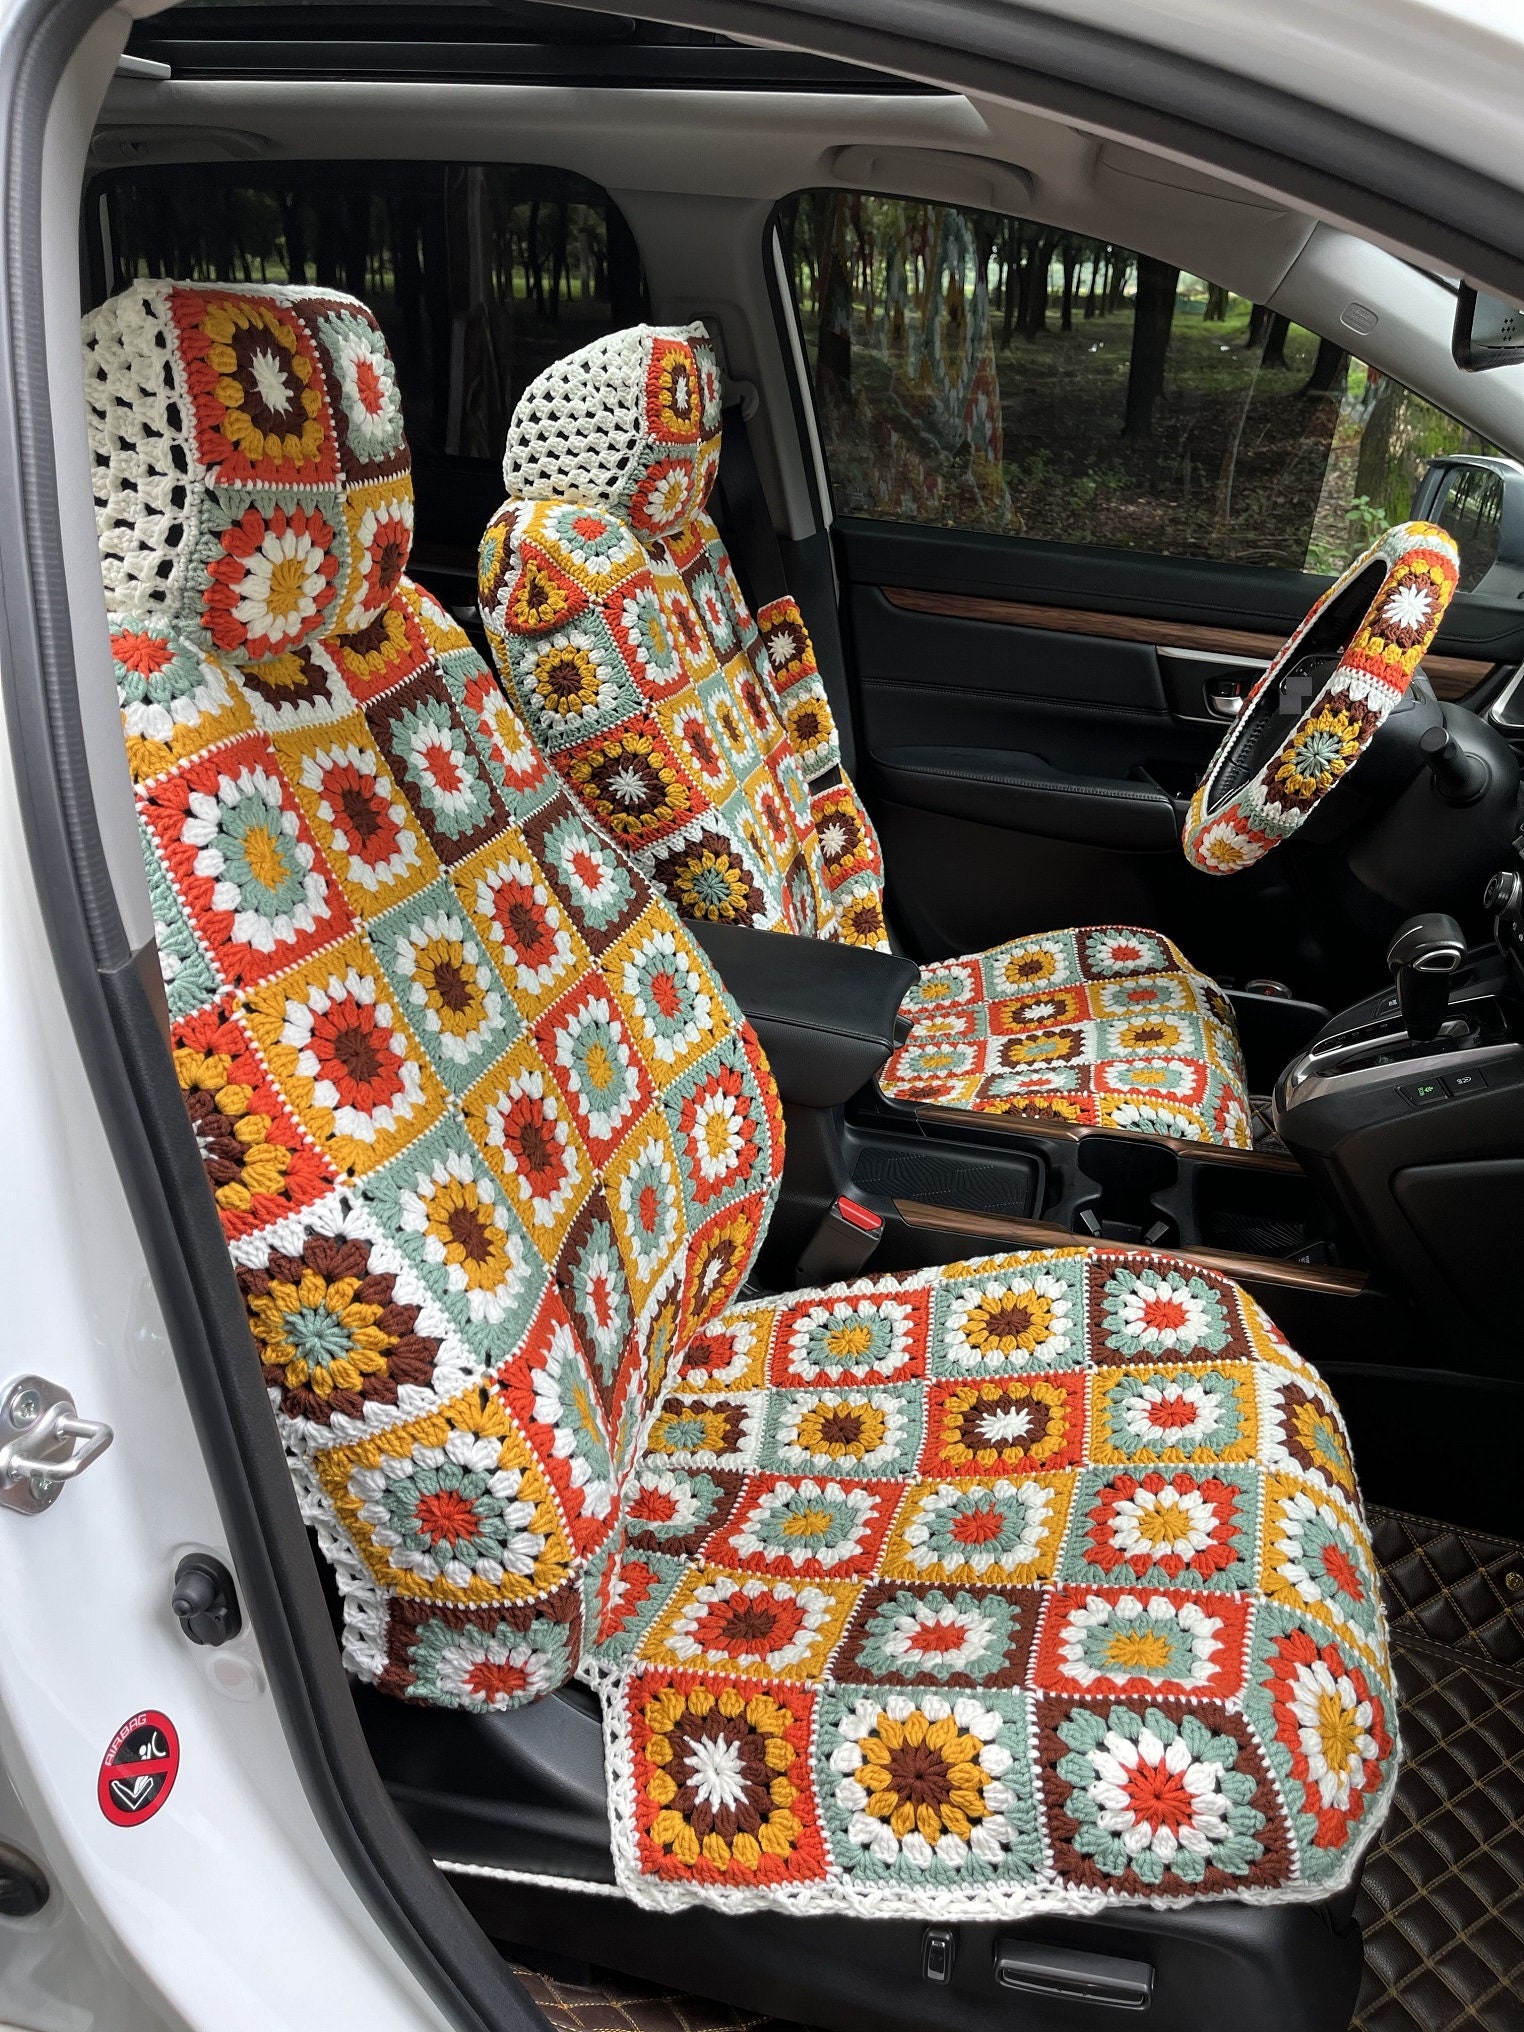 Crochet Pattern for Steering Wheel Cover Sunflower Granny Square Car  Accessories Decor Safe Belt Cover Pattern -  Israel